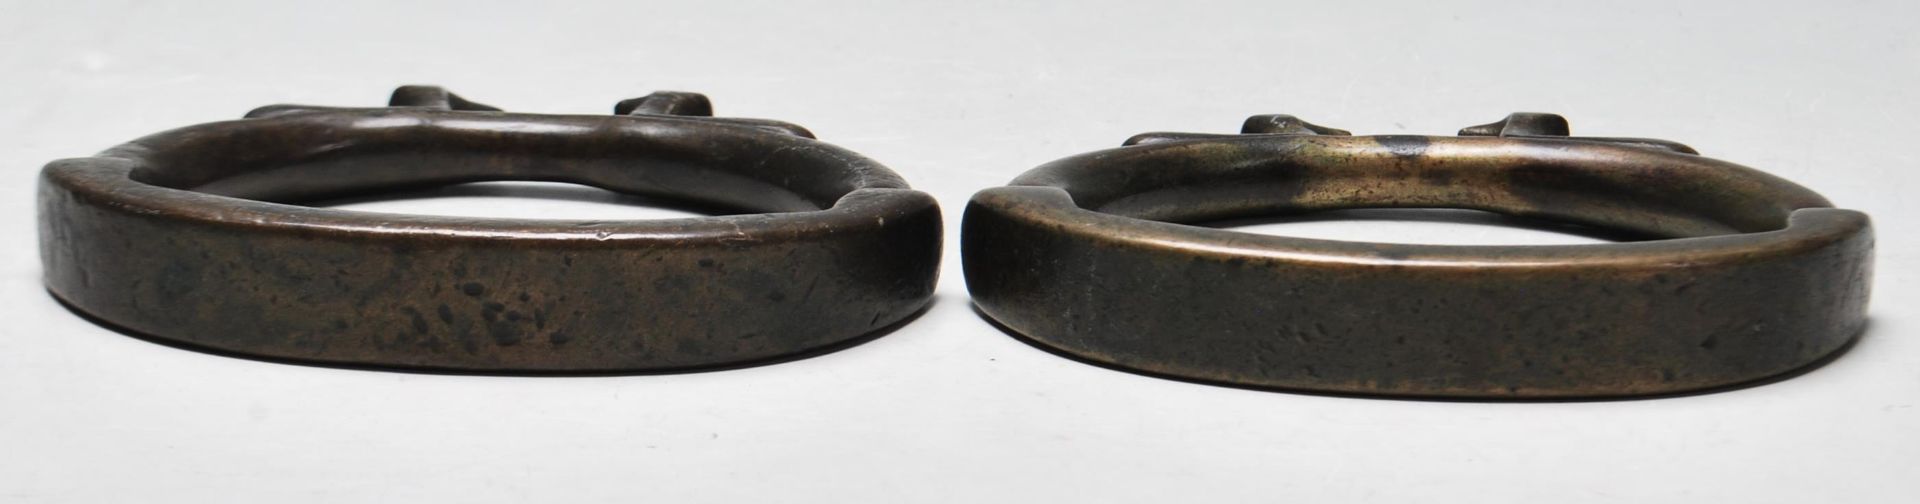 EARLY 20TH CENTURY CHINESE HORSE RIDING STIRRUPS - Image 6 of 6